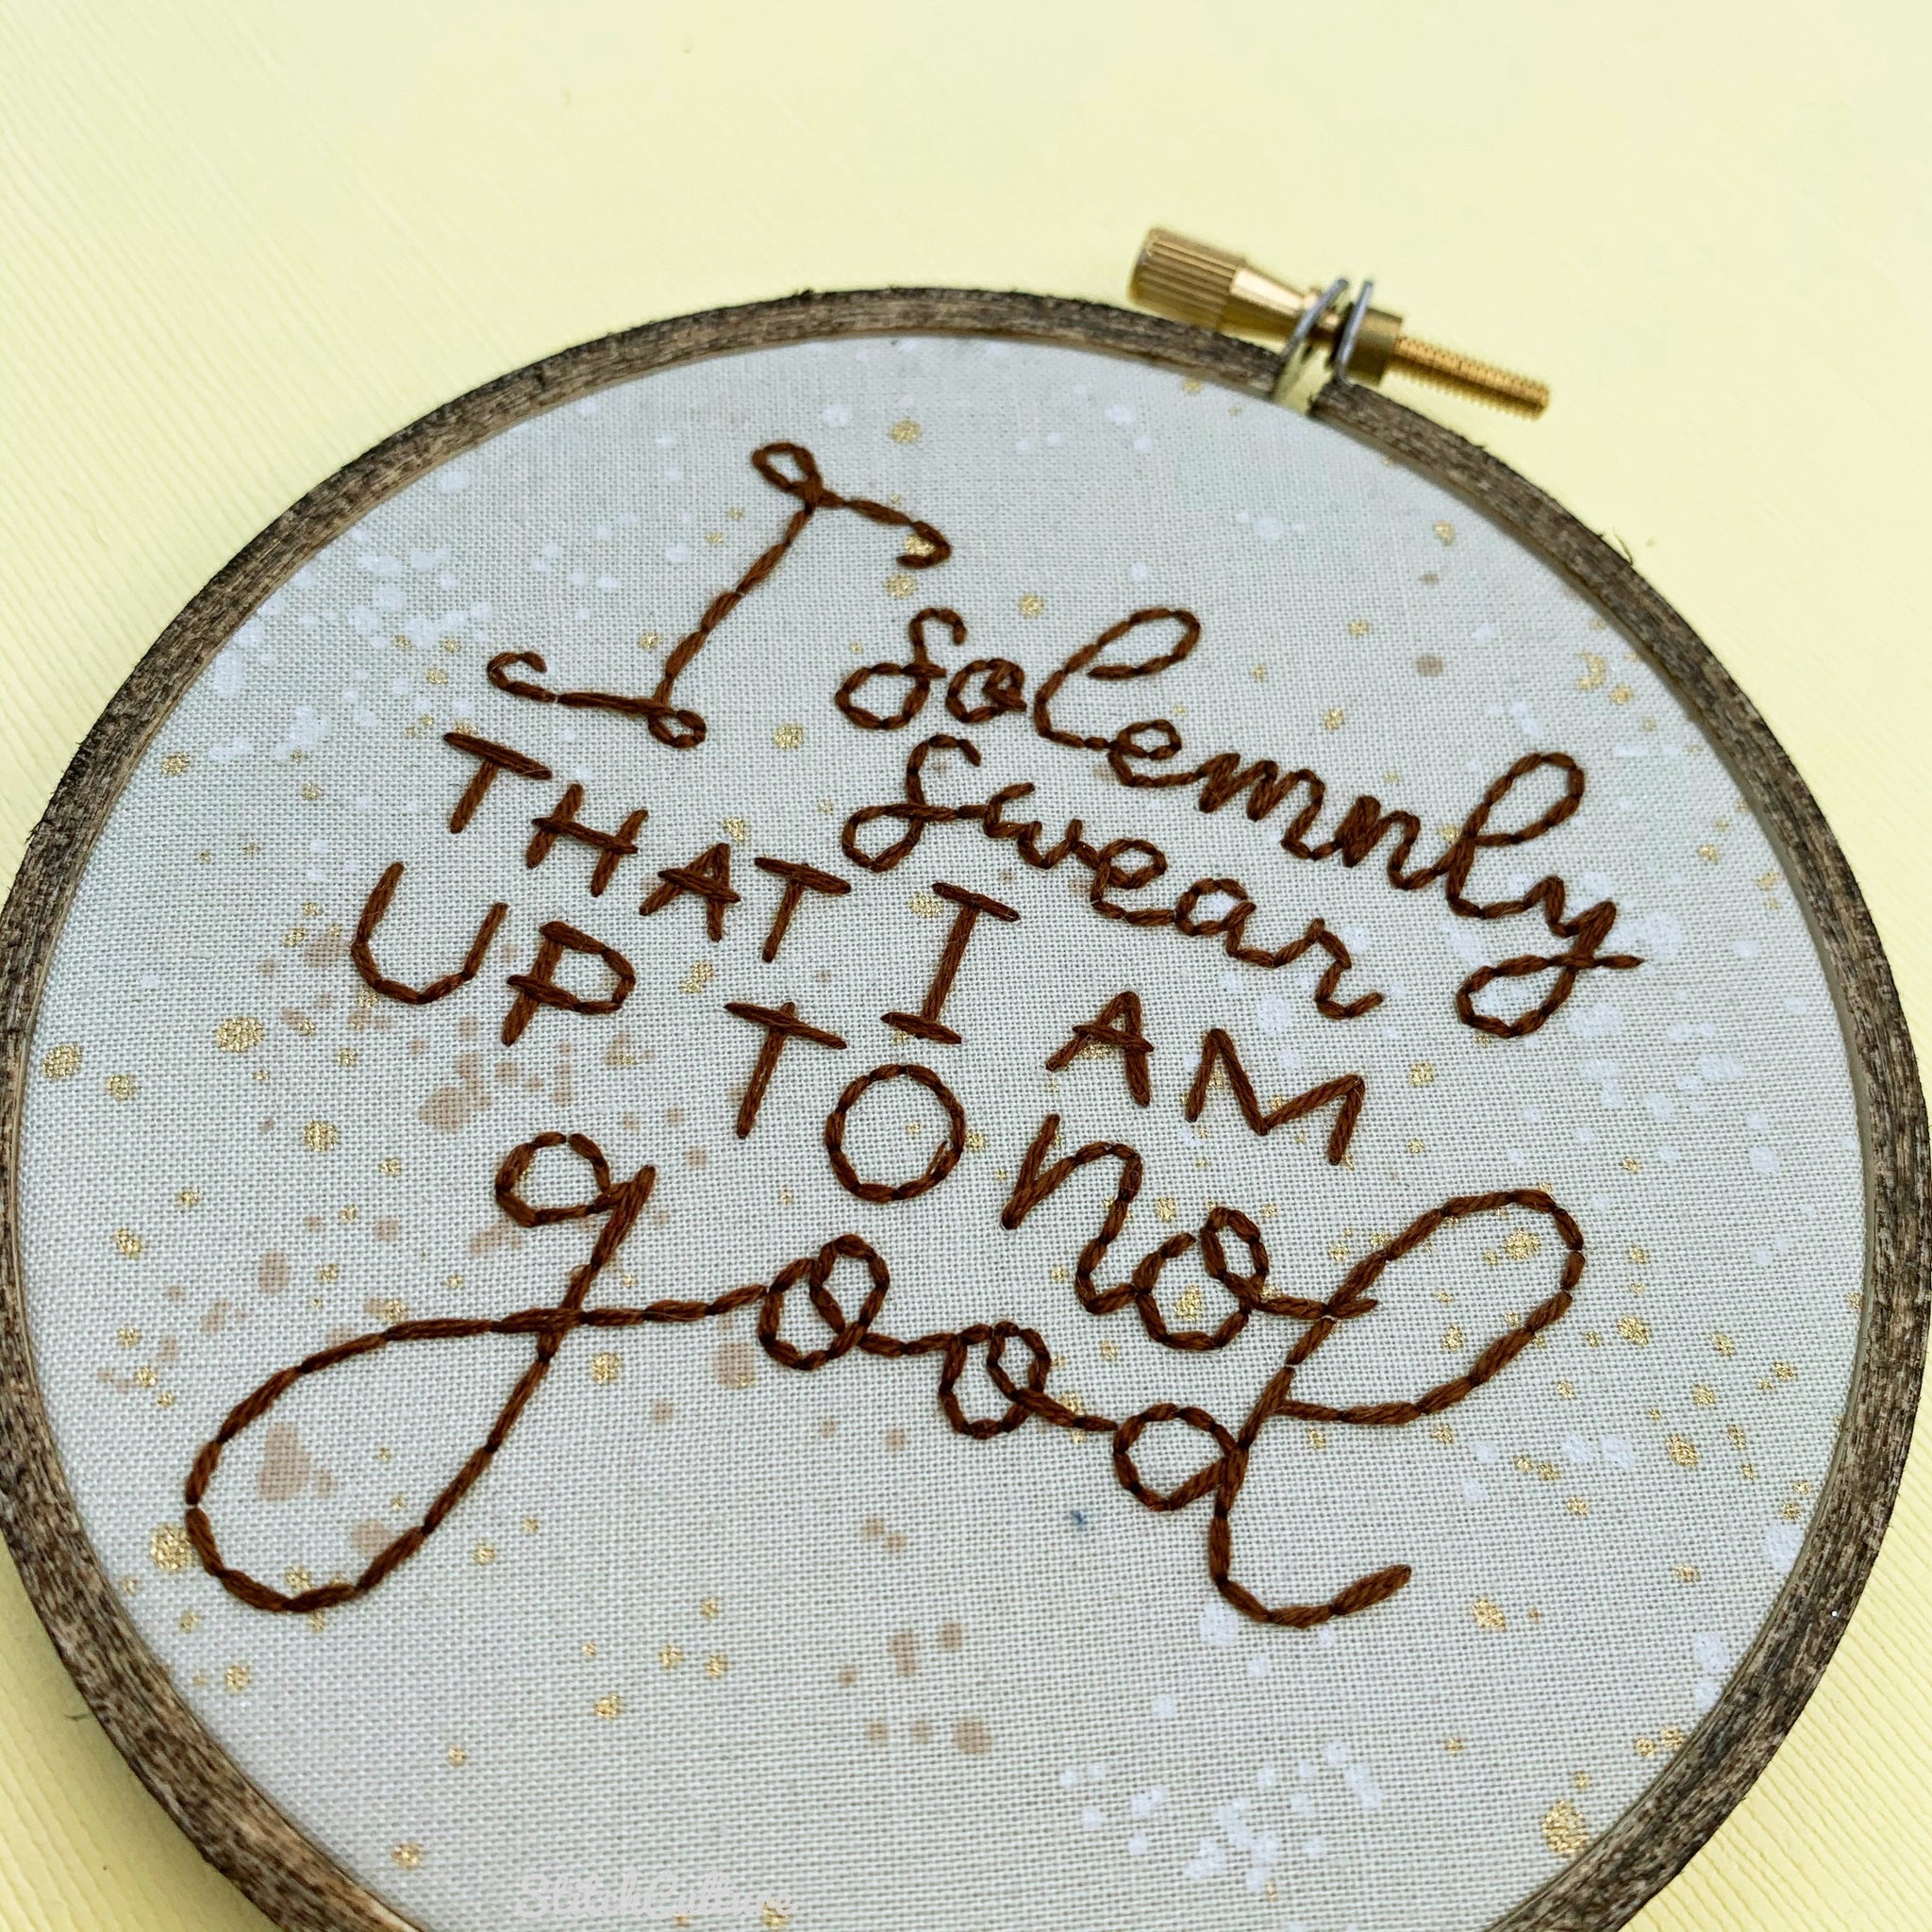 Harry Potter / I SOLEMNLY SWEAR THAT I AM UP TO NO GOOD embroidery hoop